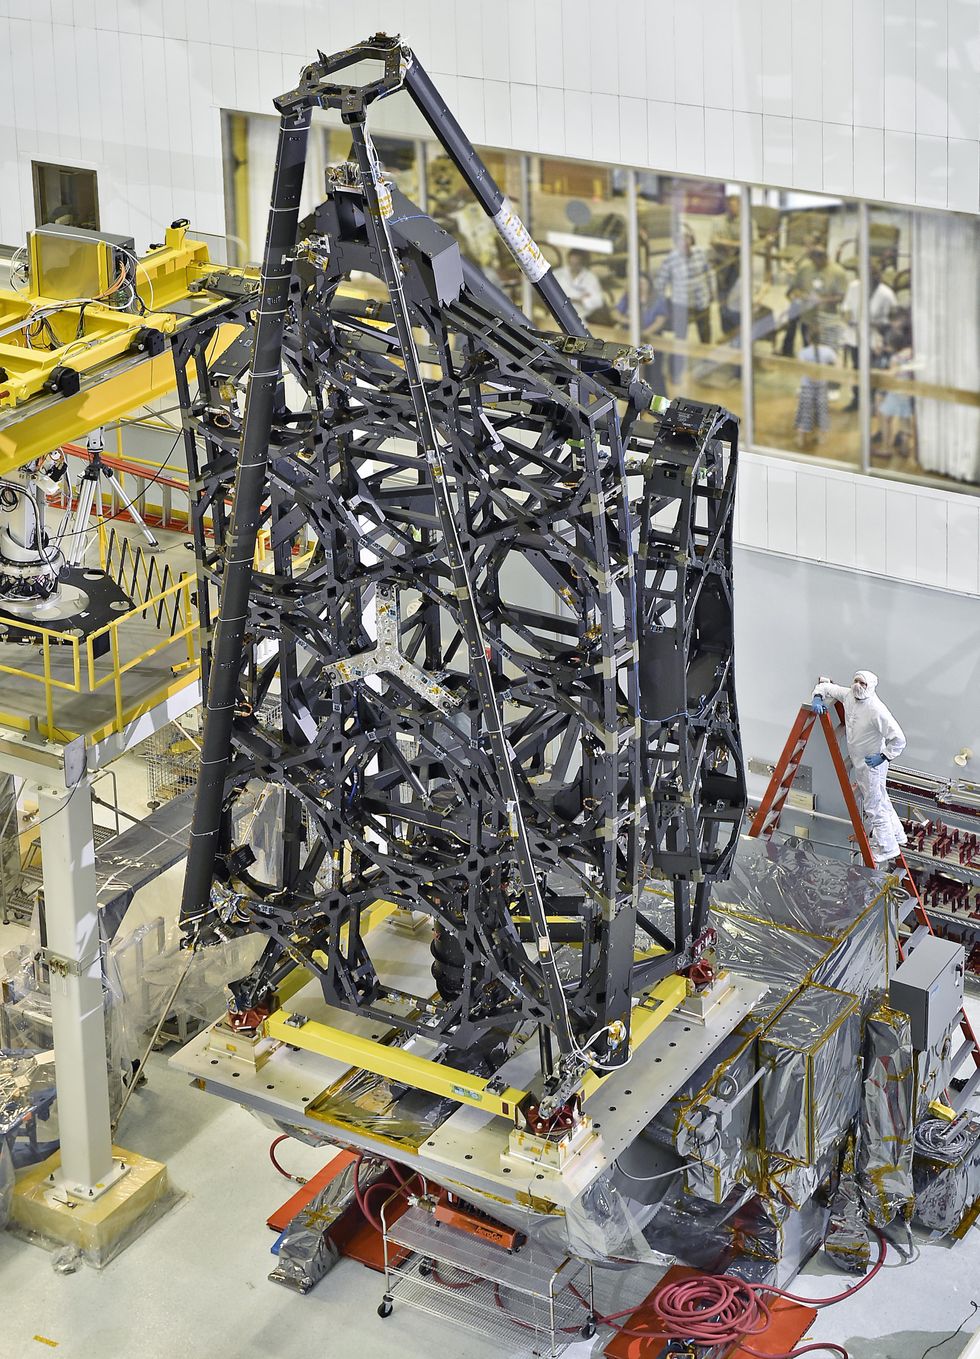 Metal superstructure of cages and supports stands on a giant platform in a warehouse-sized clean-room. A man in a cleanroom suit watches the operations.